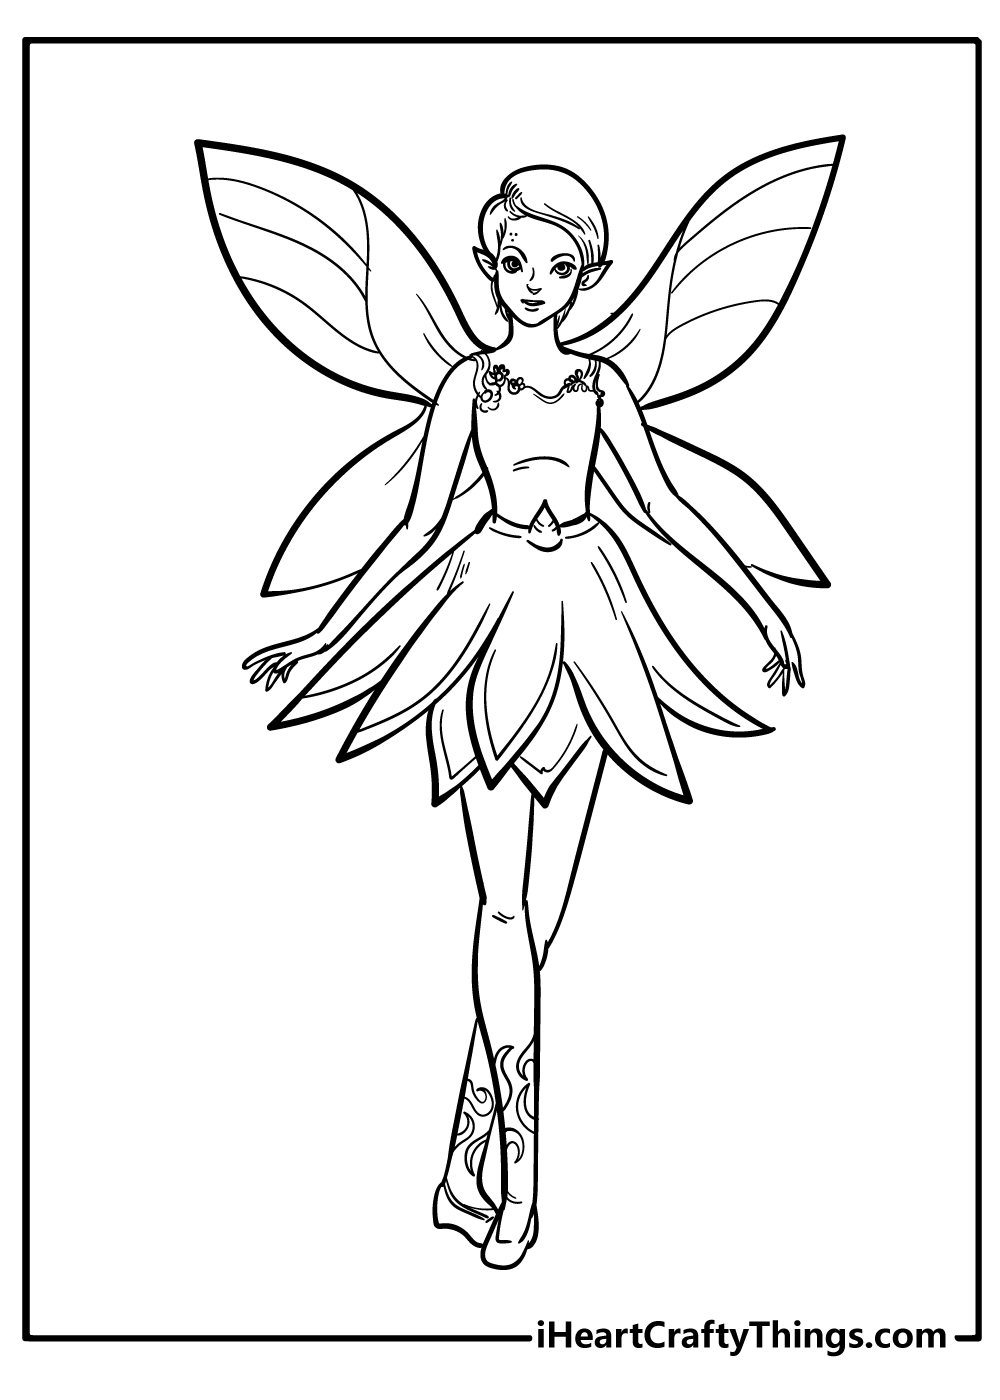 Fairy Coloring Pages free download